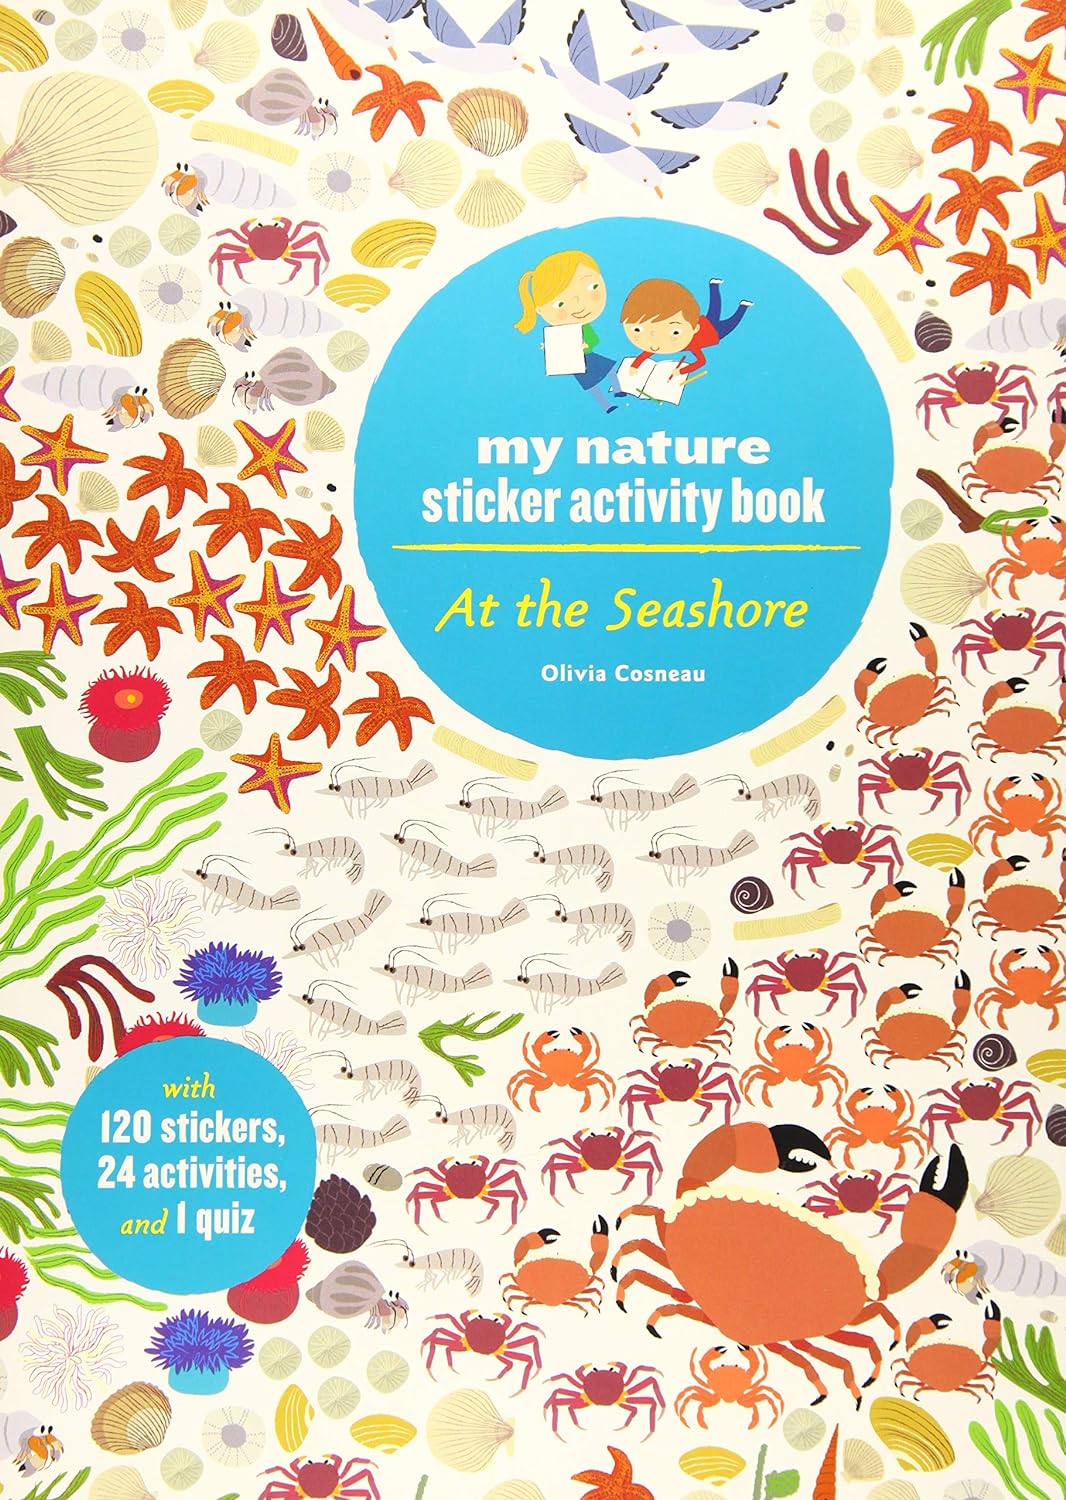 Keep young nature lovers entertained for hours with interactive activities and beautiful illustrations. Children are encouraged to color, sticker, draw, and learn.